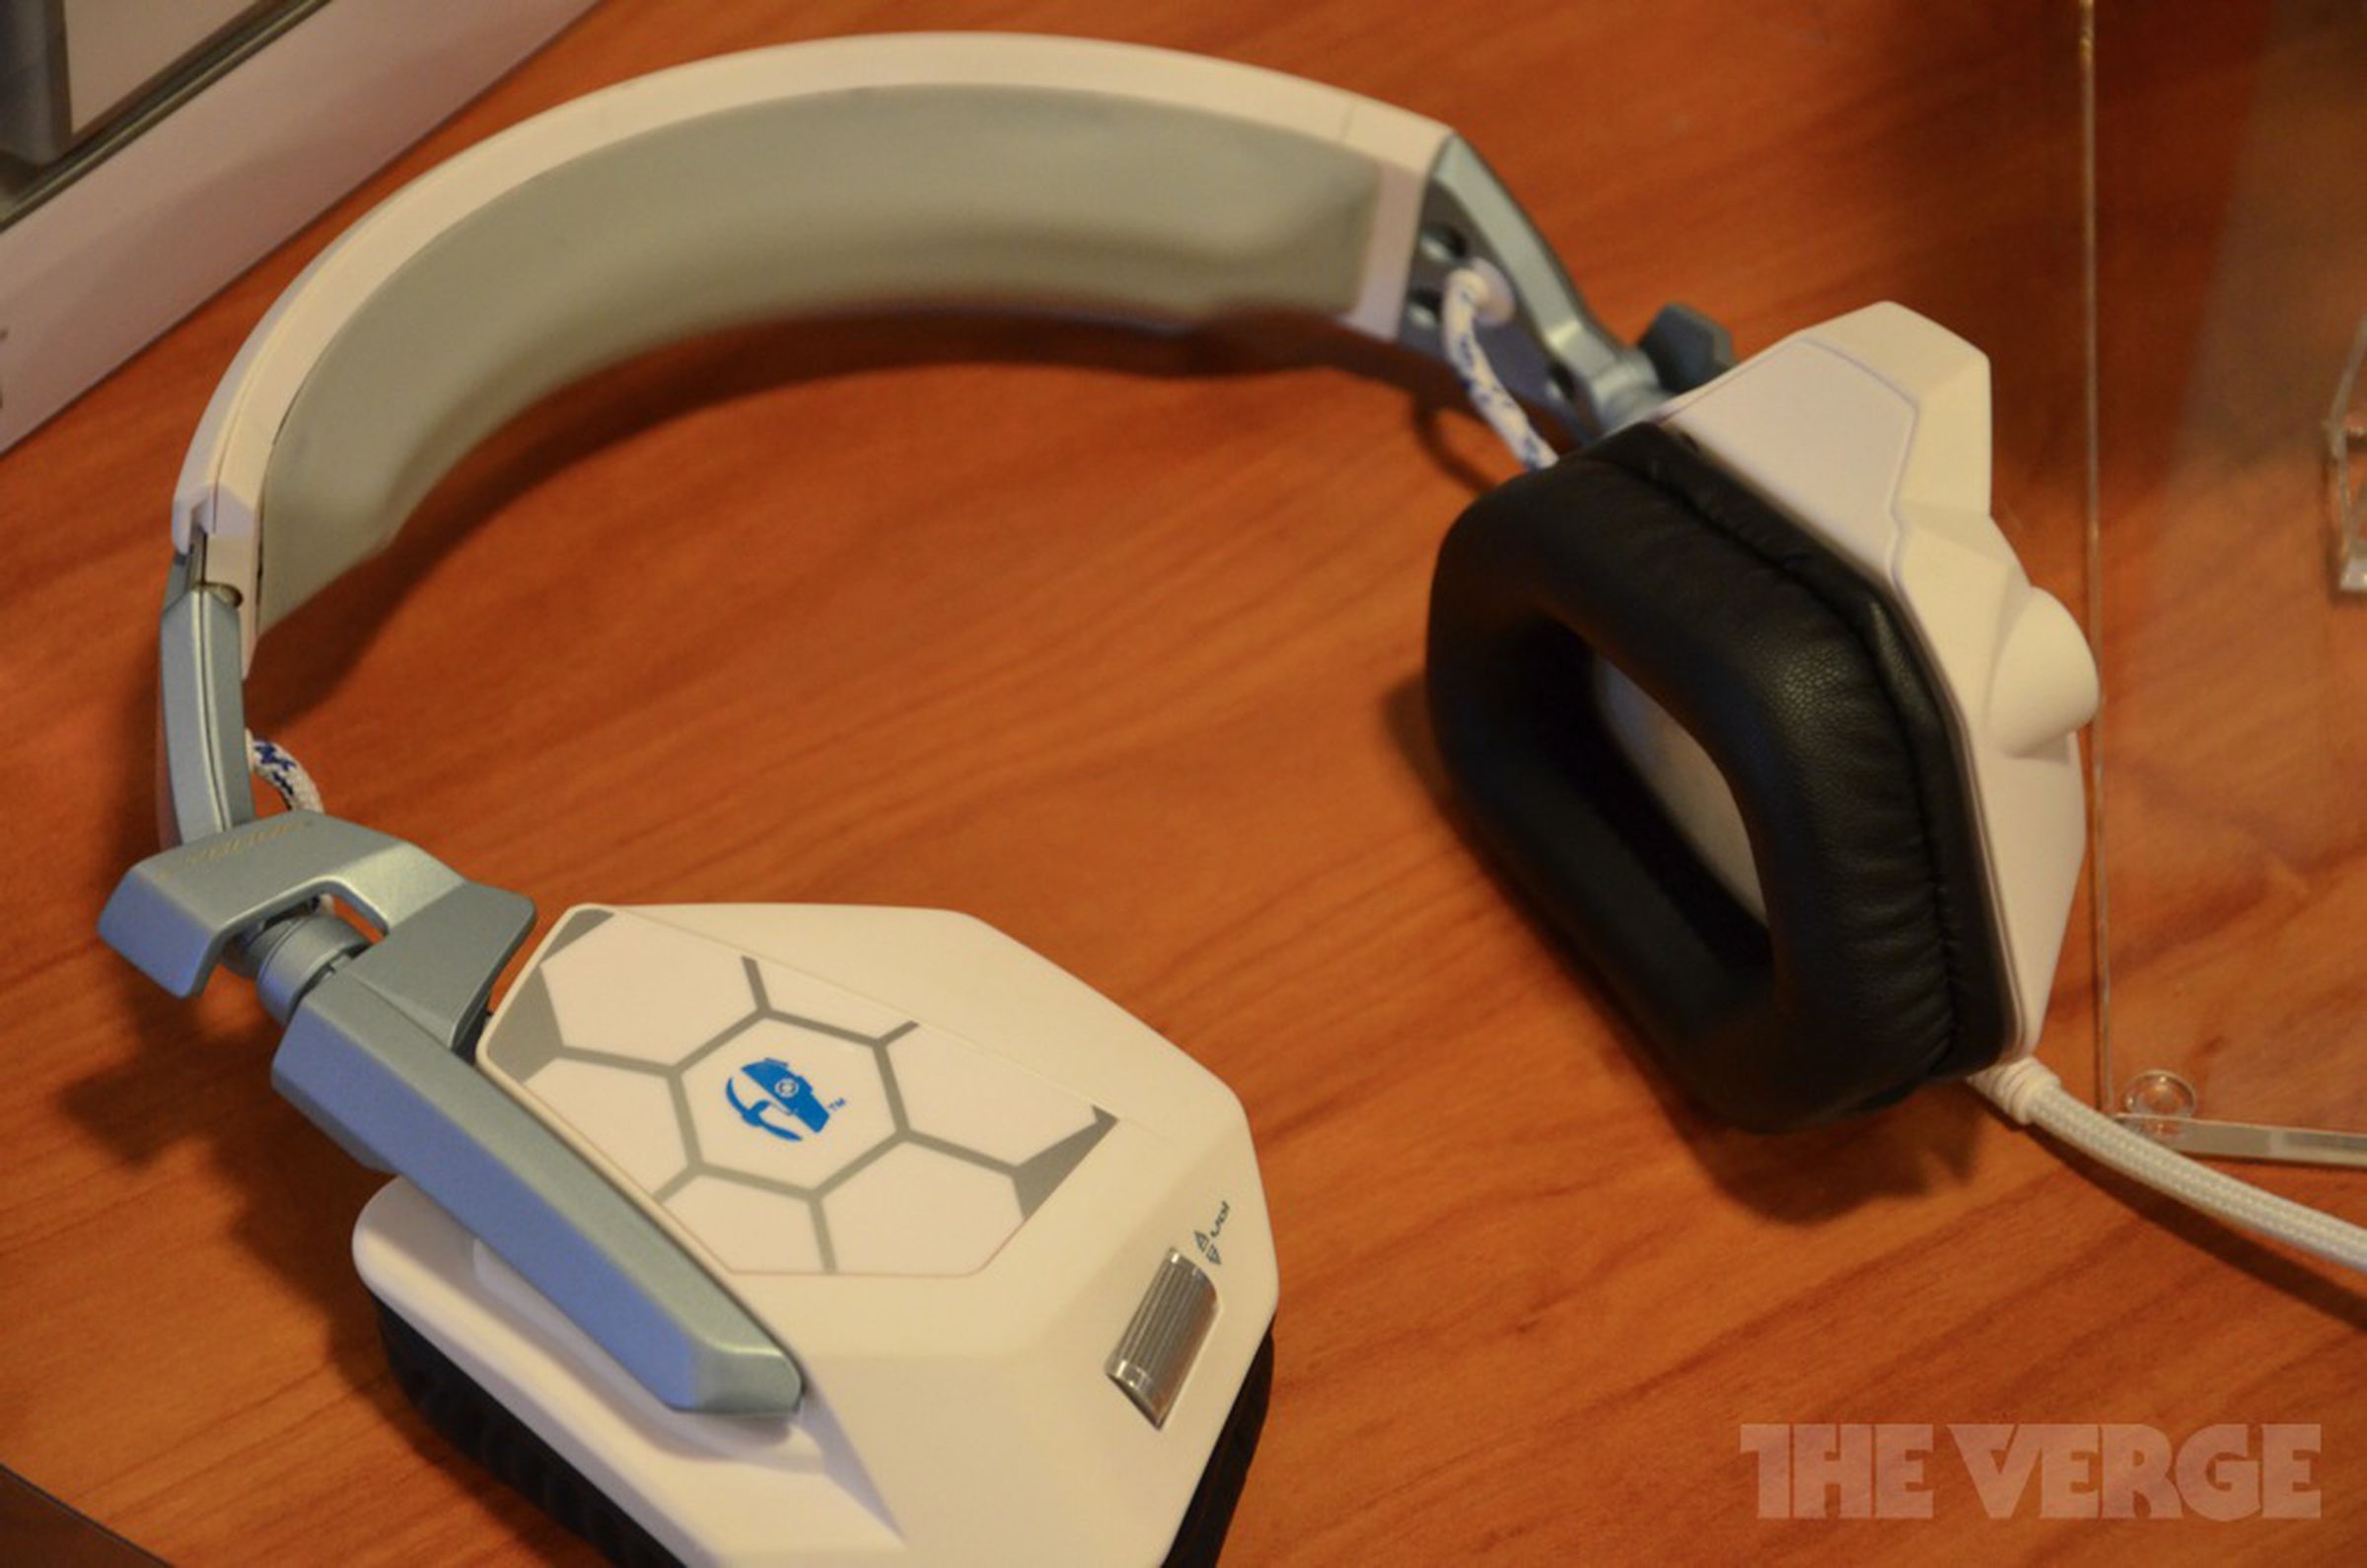 Mad Catz Cyborg Freq 5 headset, MMO7 mouse, and Street Fighter x Tekken Arcade FightStick VS hands-on pictures